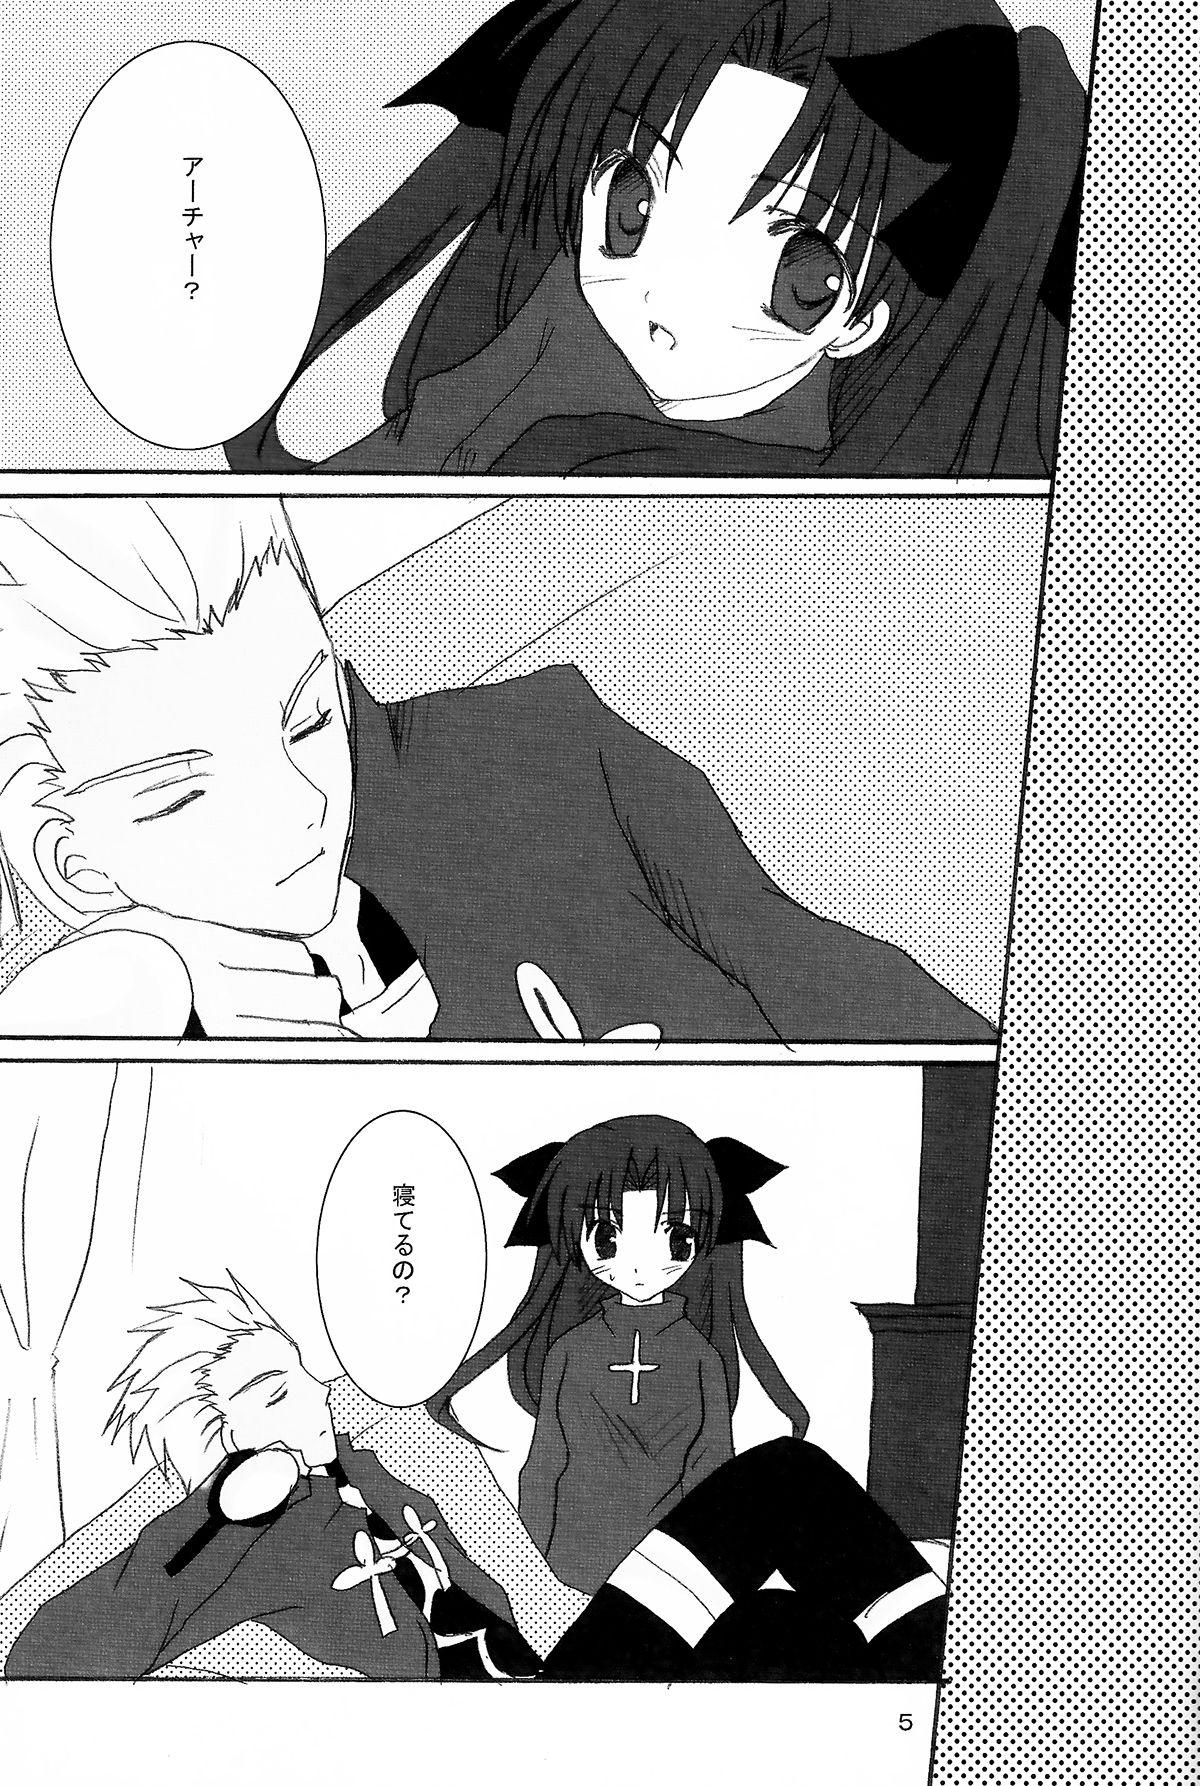 Skirt Infinite Emotion - Fate stay night Squirting - Page 3